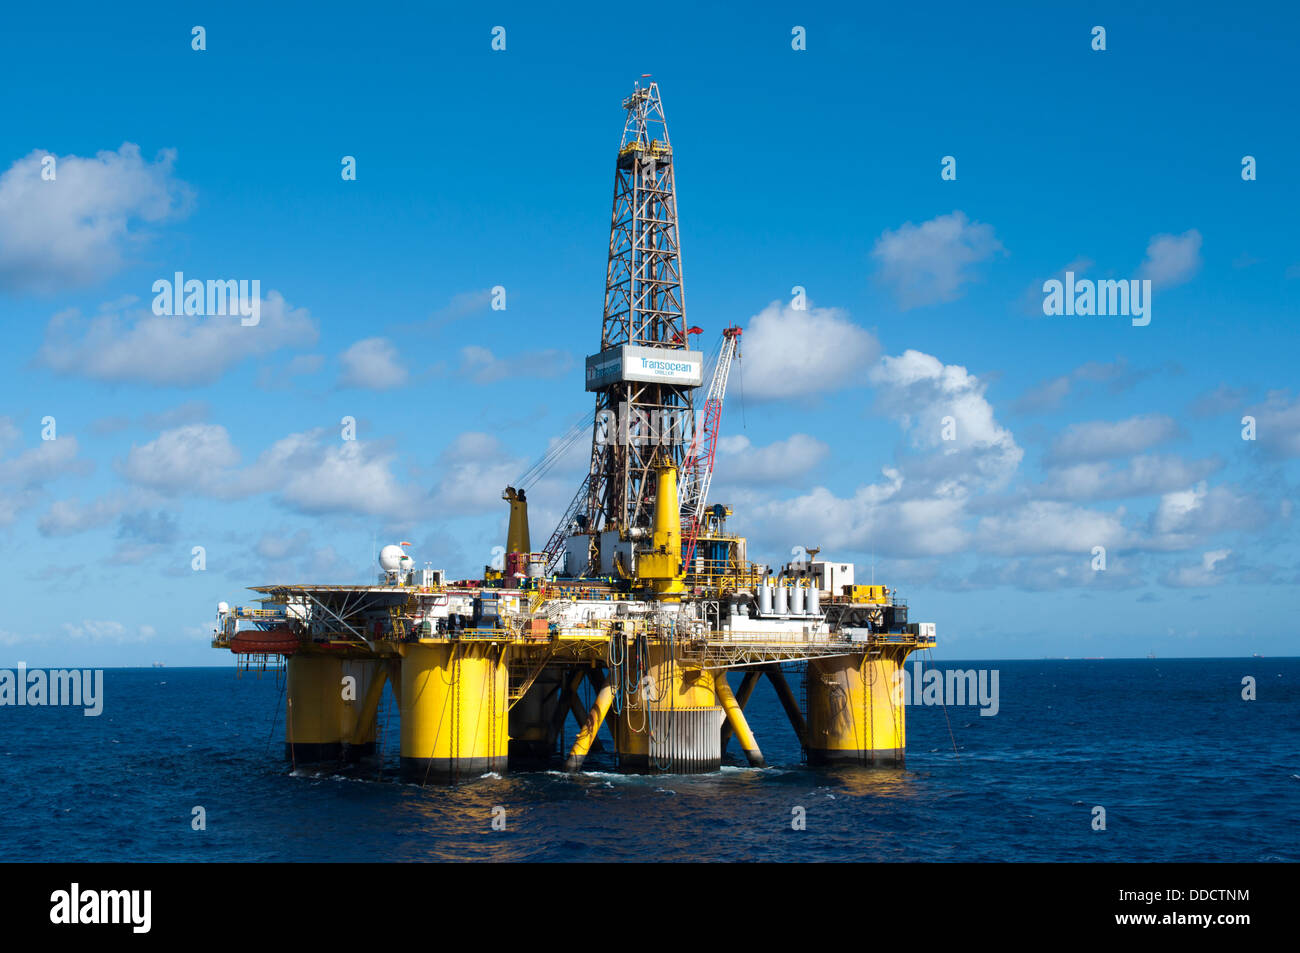 Transocean oil drilling rig, working for Petrobras Brazilian oil company in Campos Basin, Offshore Rio de Janeiro state. 2011. Stock Photo